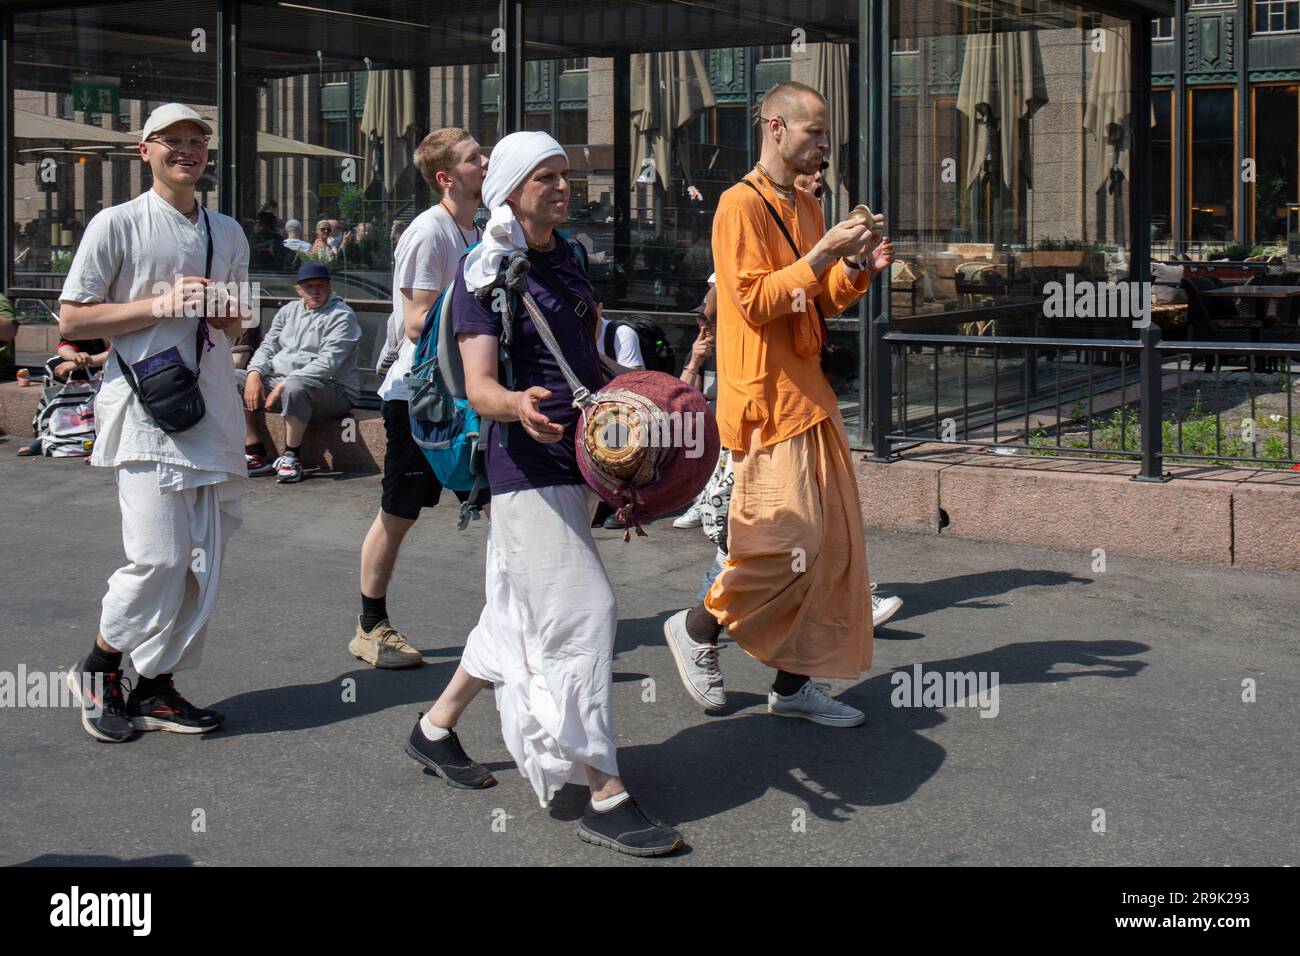 Chanting Hare Krishna devotees on a sunny summer day in Helsinki, Finland Stock Photo